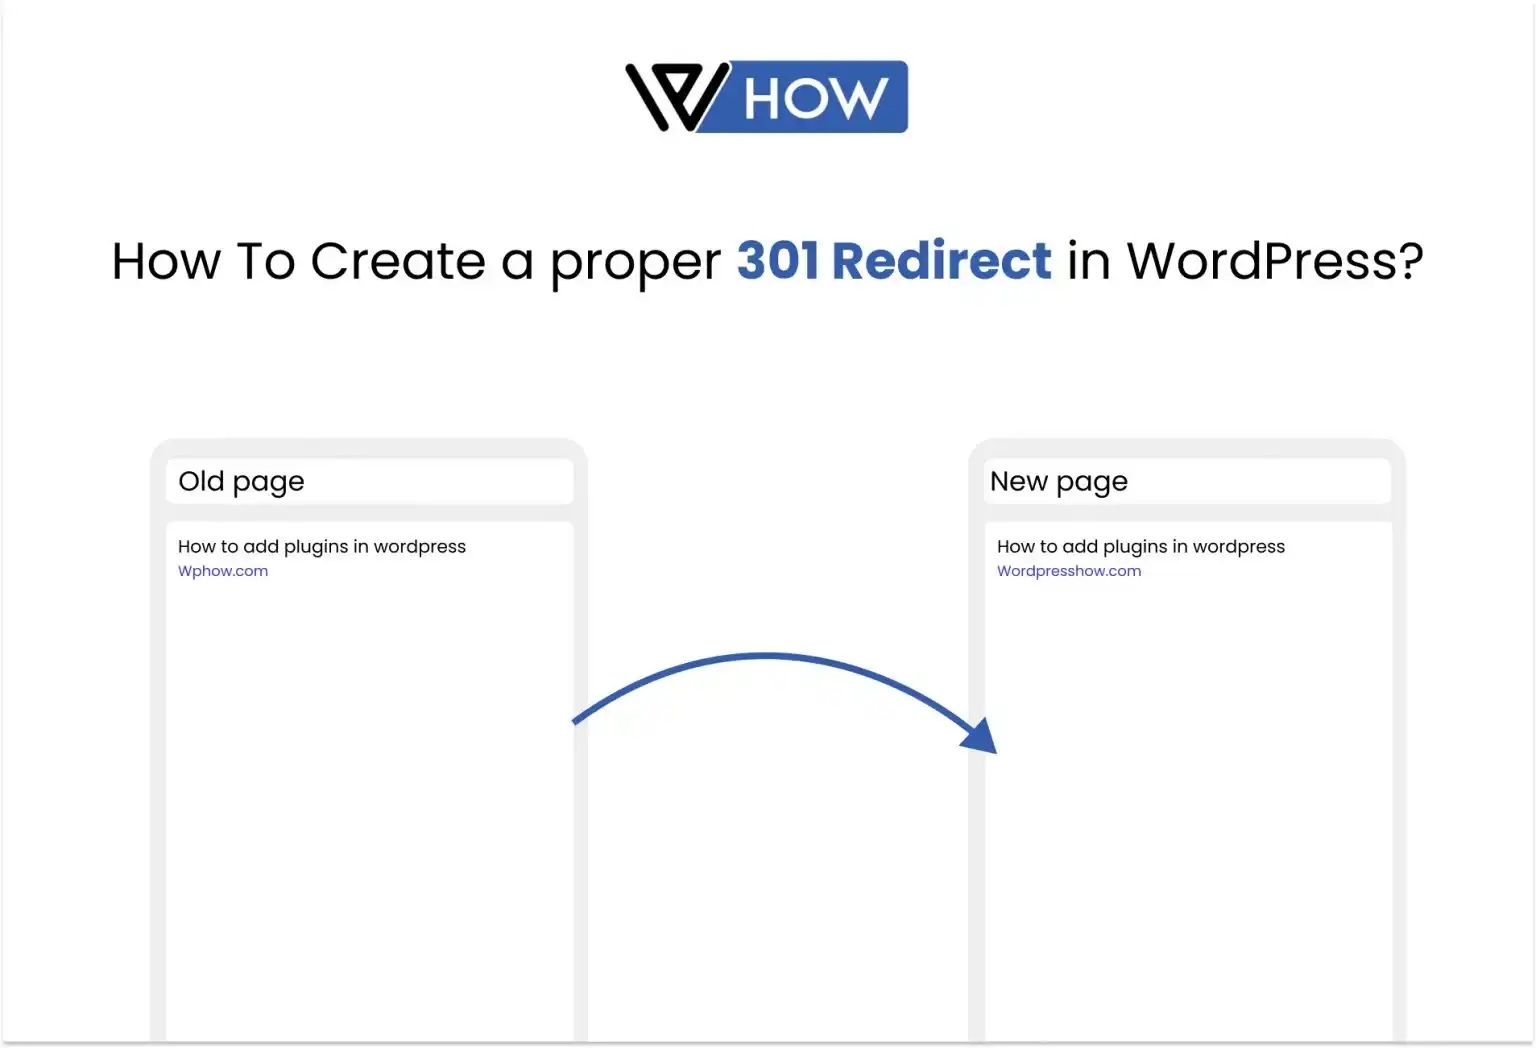 How to Create a Proper 301 Redirect in WordPress?